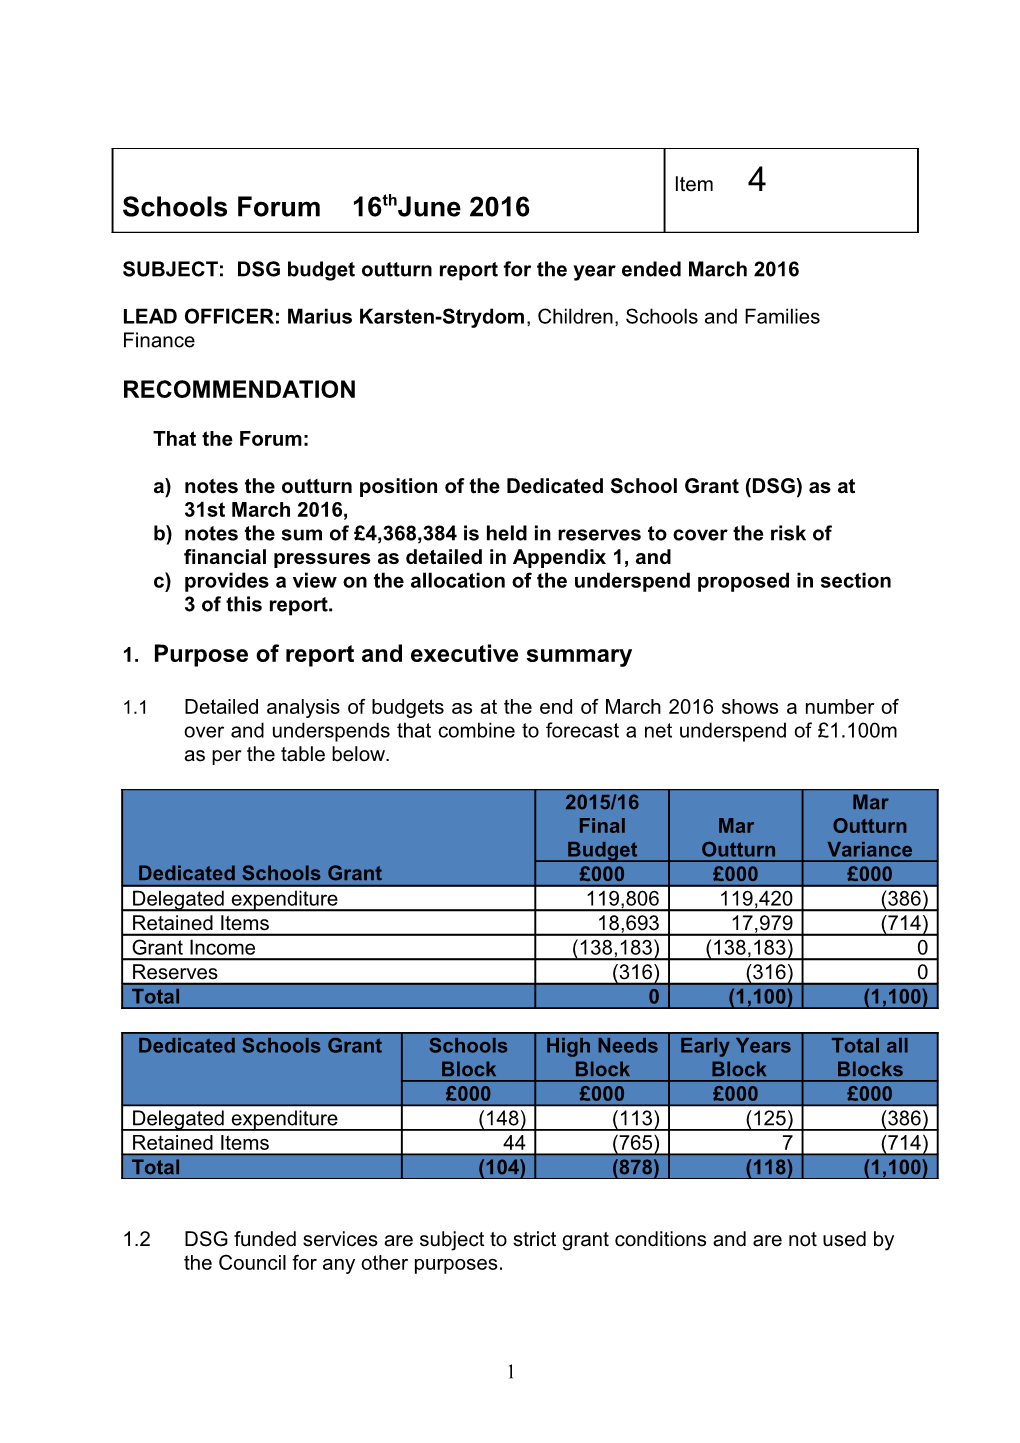 SUBJECT: DSG Budget Outturn Report for the Year Ended March 2016